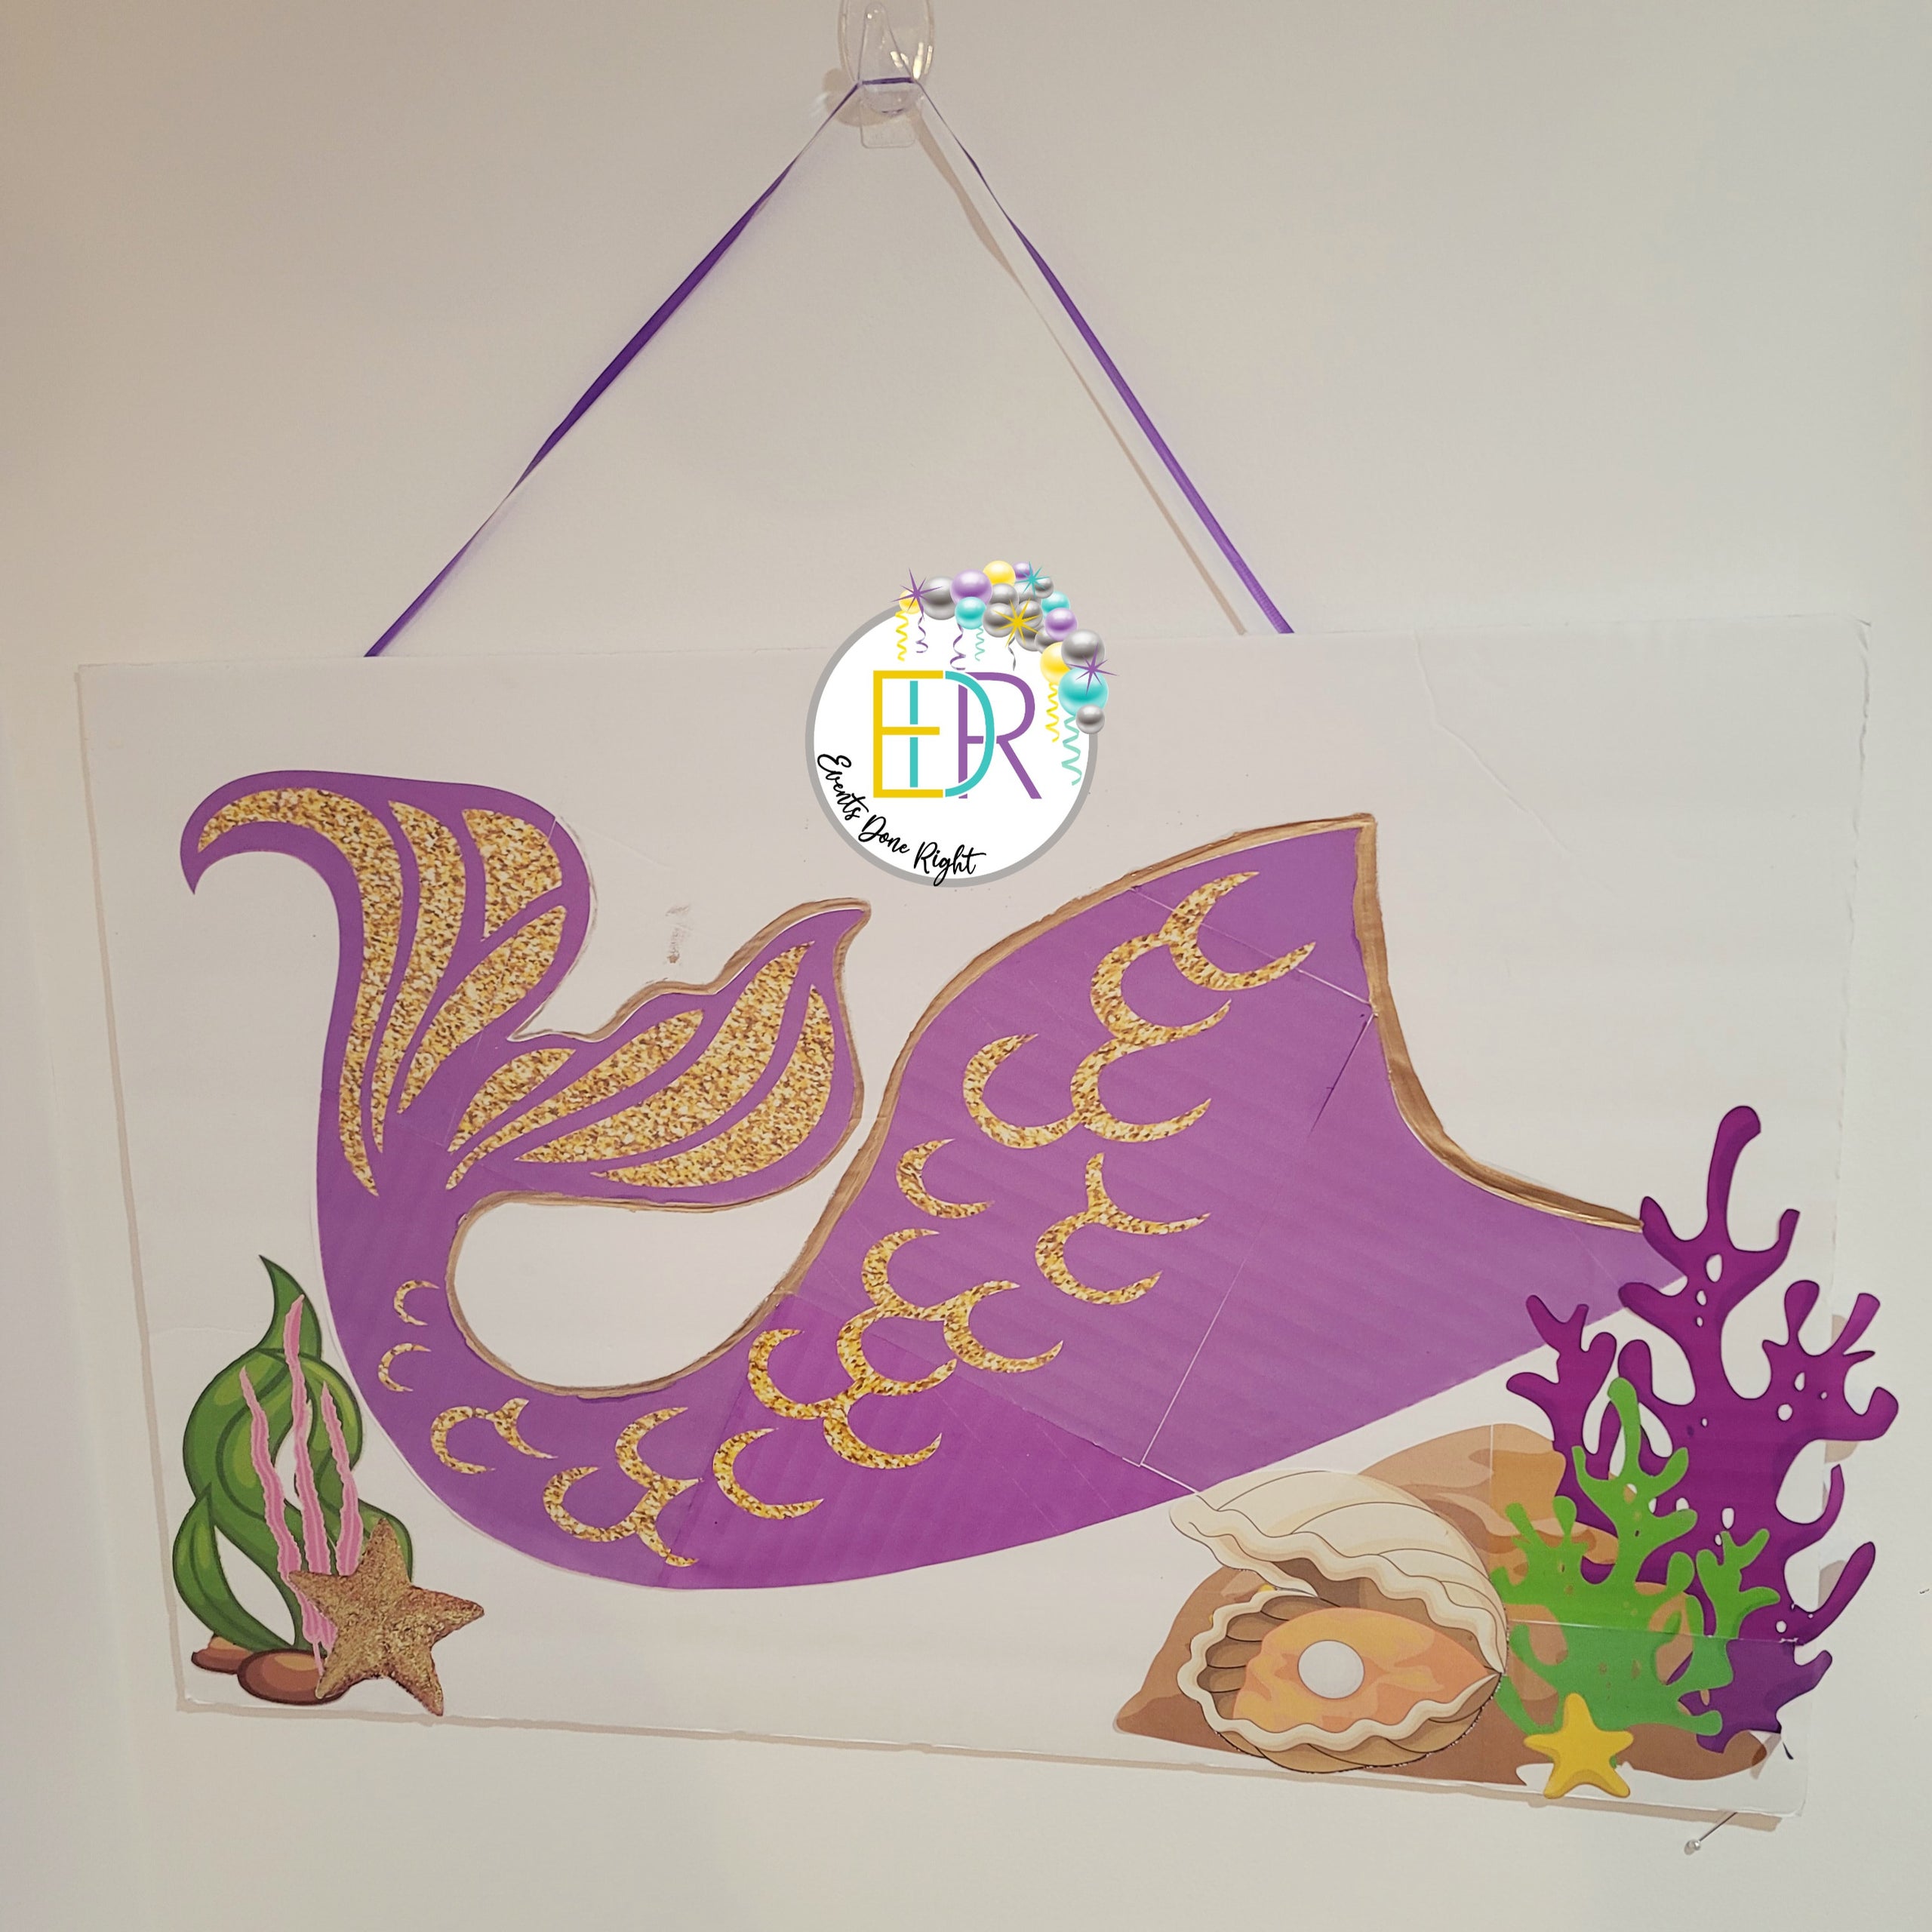 Mermaid Under the Sea Theme Party Games Tail Scales Seaweed Shells Pearl  Seahorse Starfish Bubbles Rocks baby shower 1st birthday party decorations  supplies. Party Games 4 games, 12 a piece.